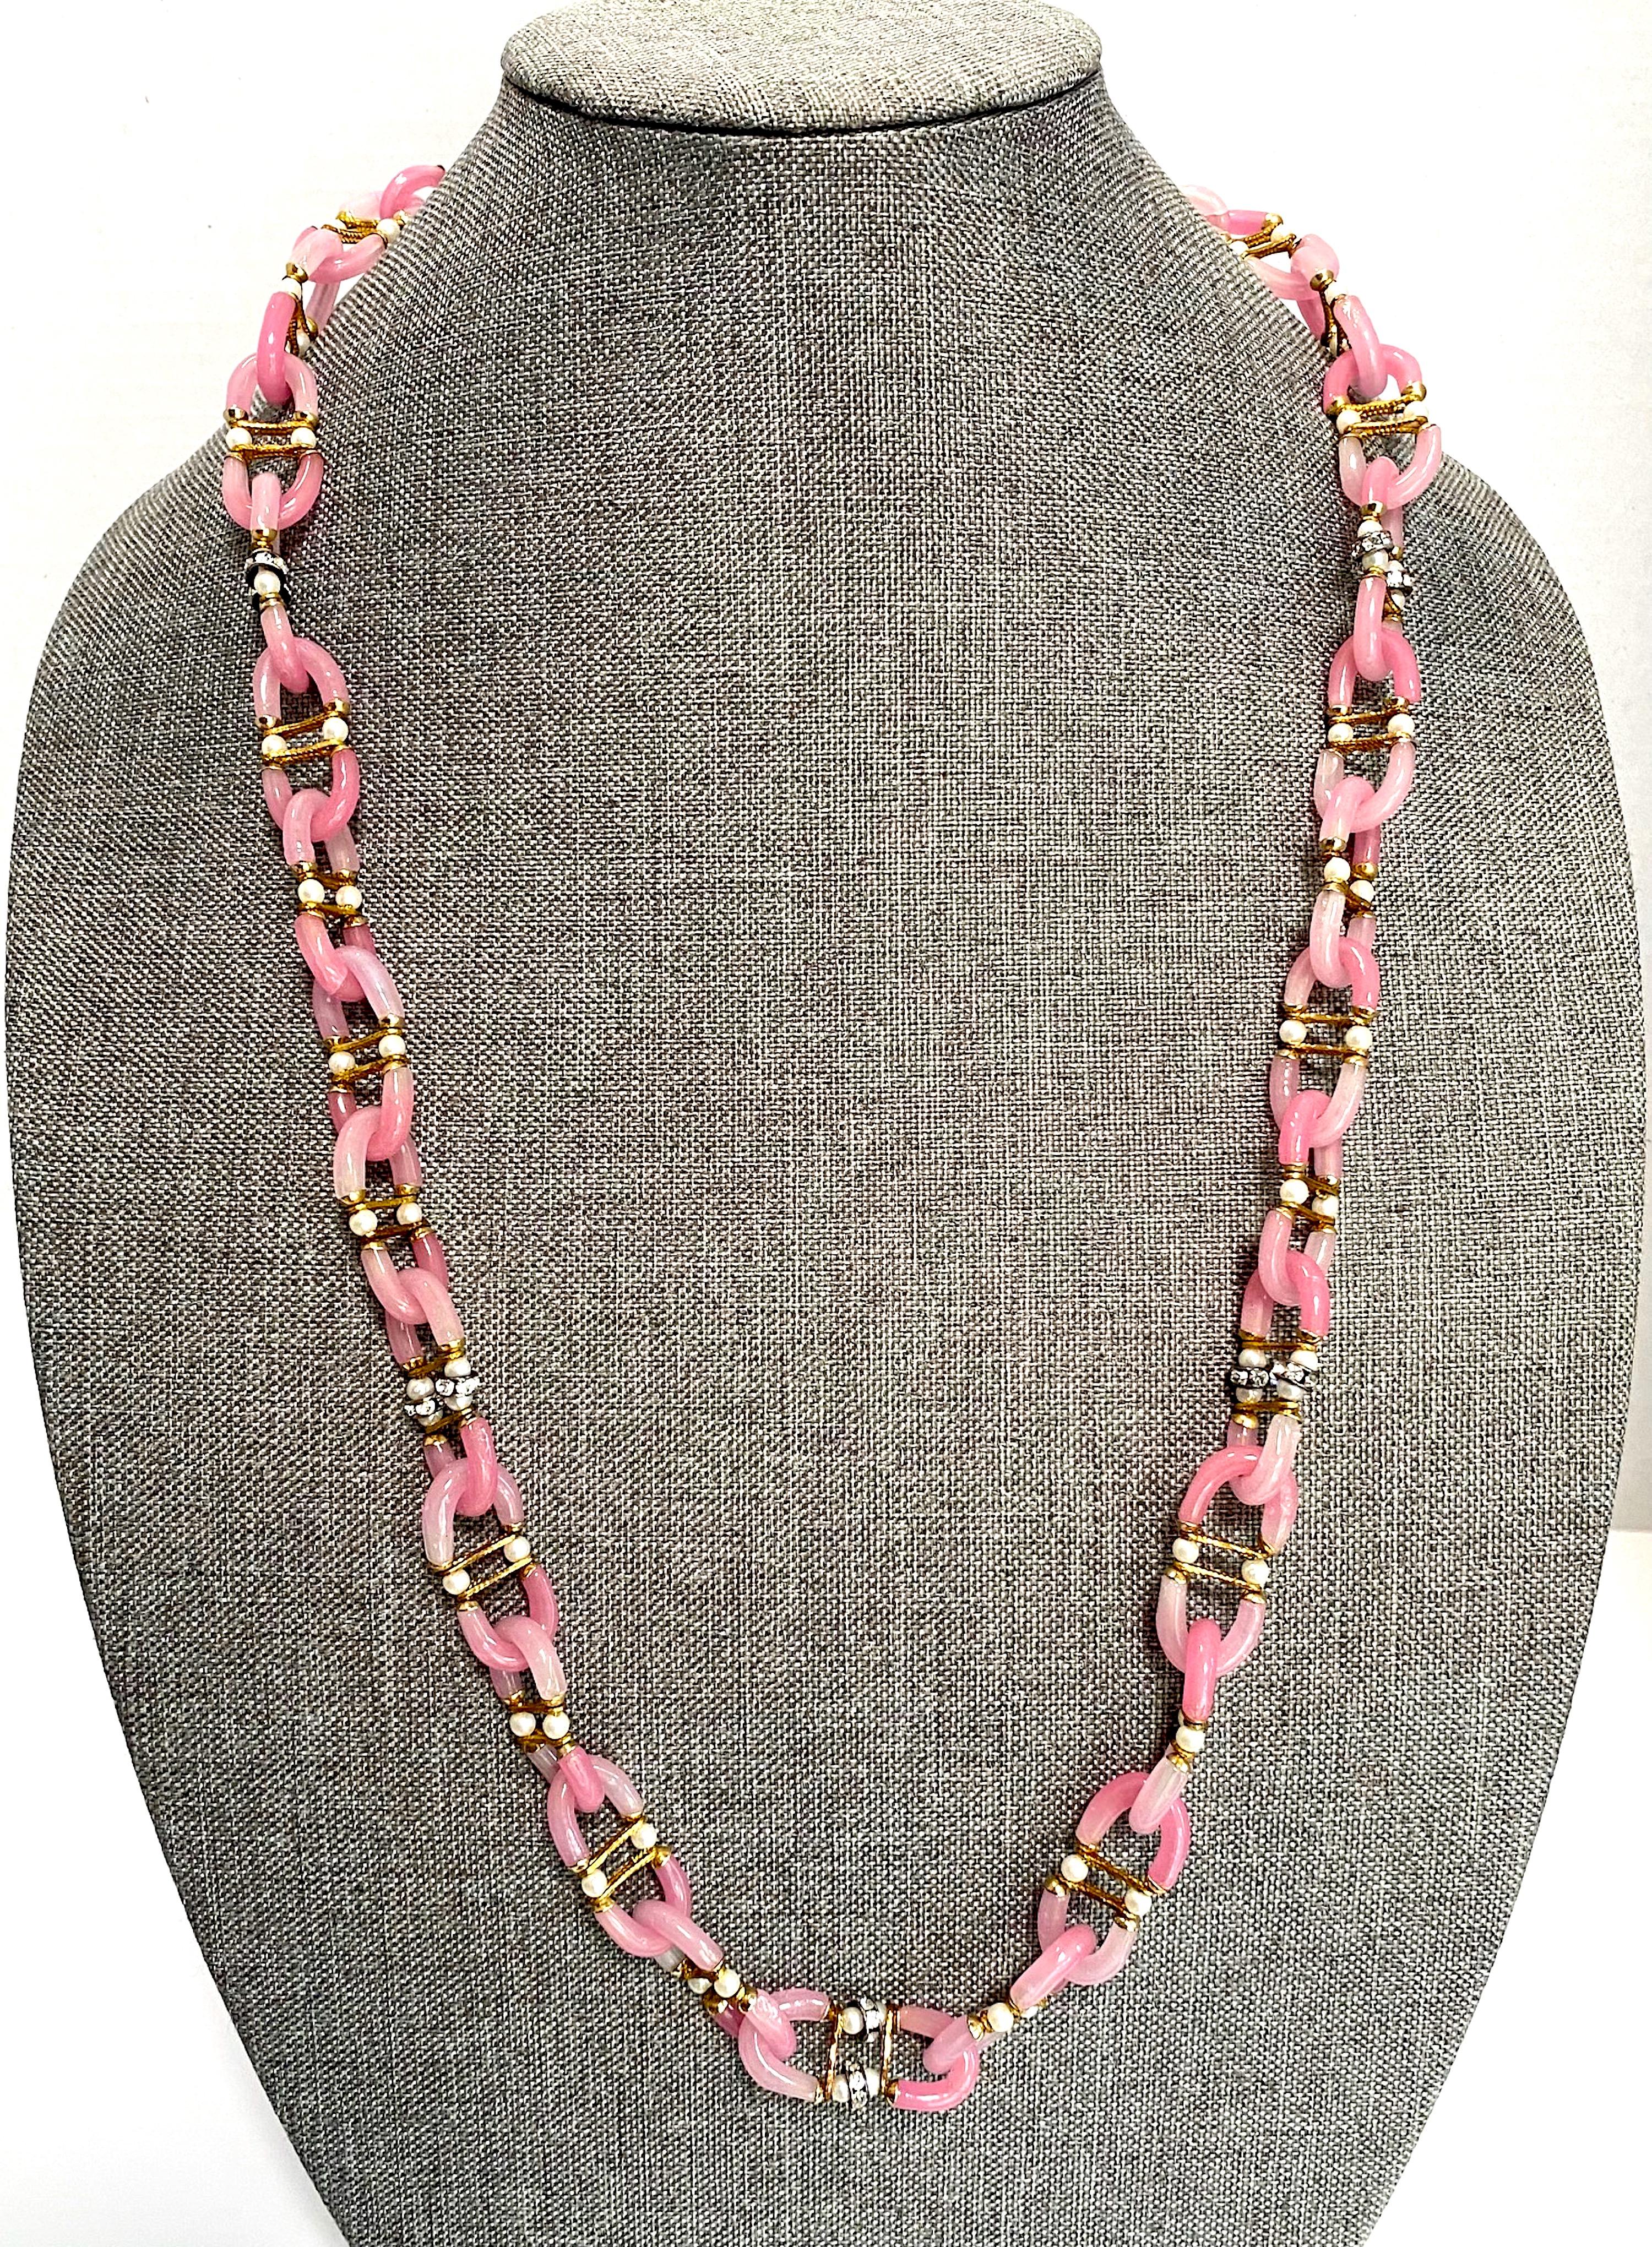 Archimede Seguso, Vetri d'Arte, for Chanel Rose Pink Glass Chain Necklace, 1960s 1